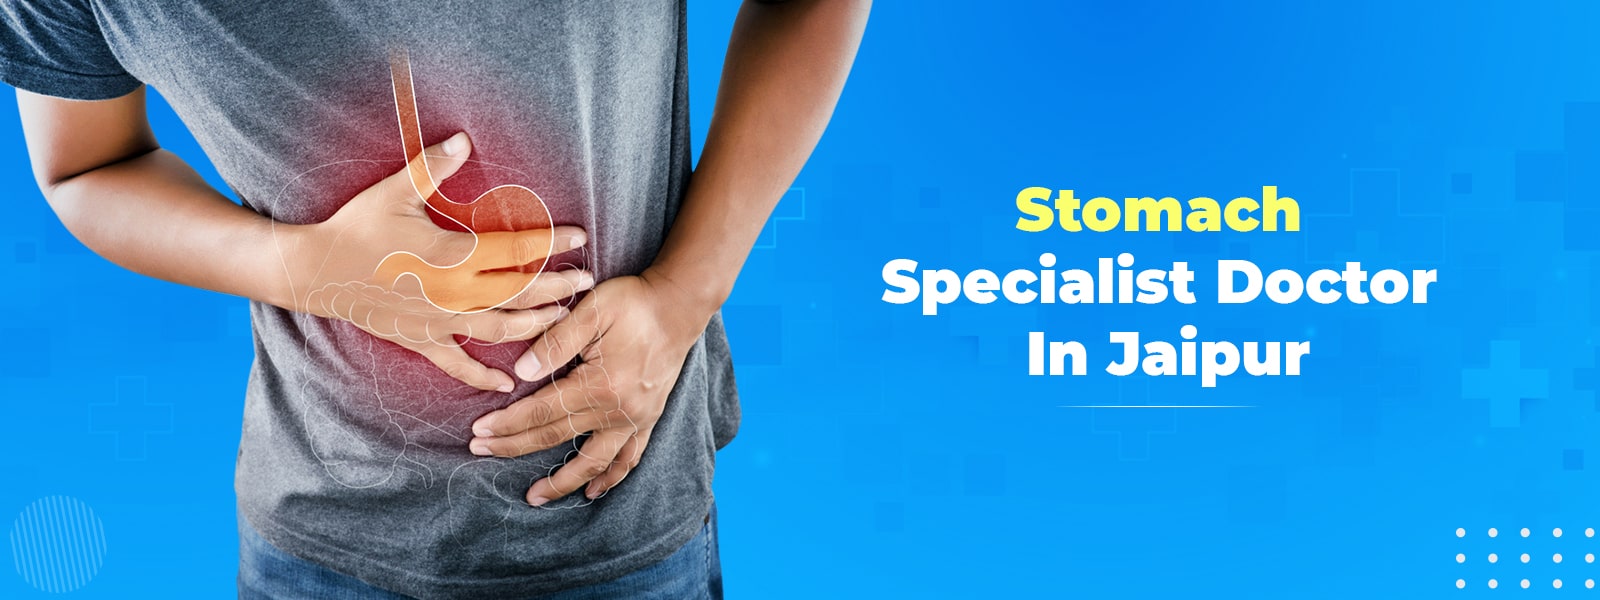 Stomach Specialist Doctor in Jaipur